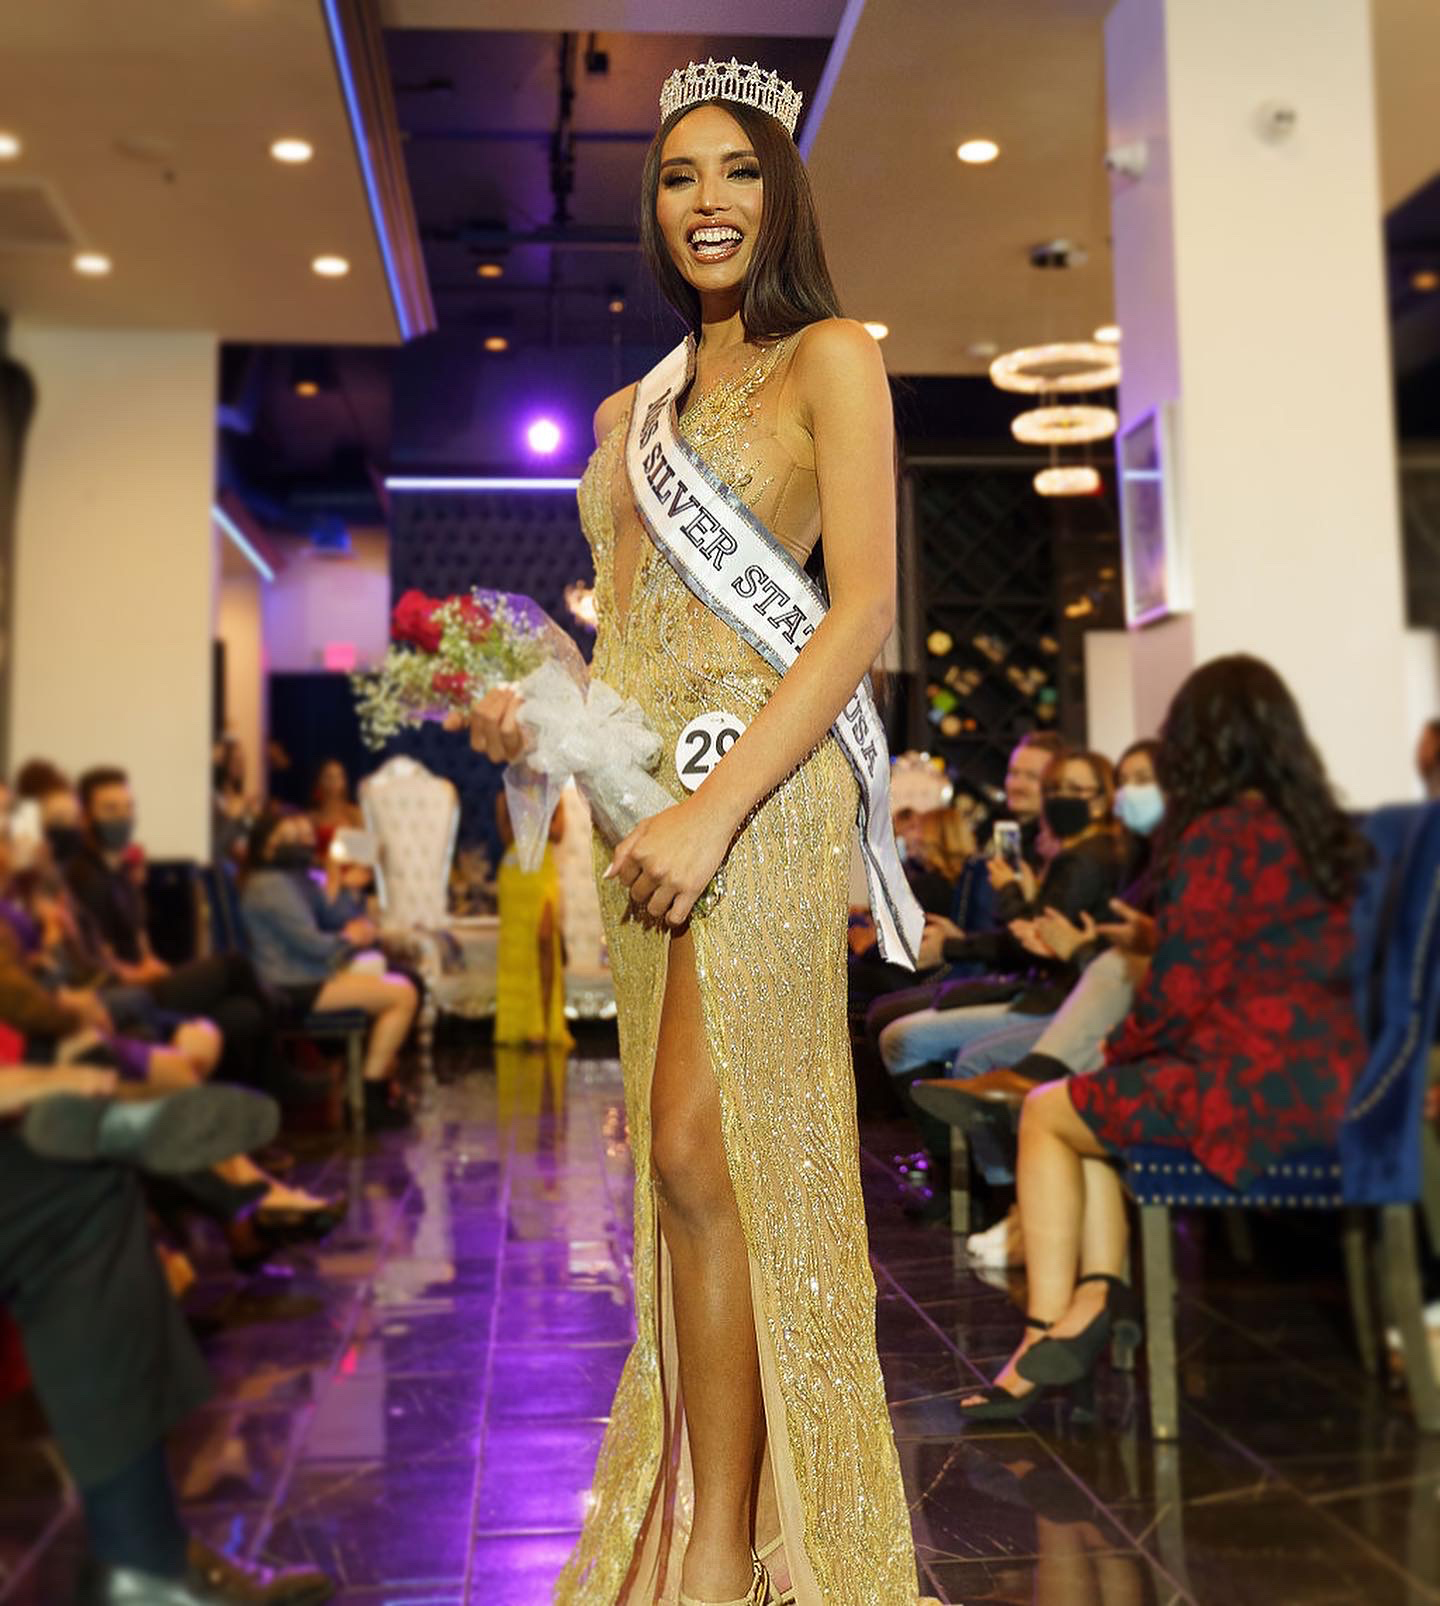 PHOTO: Kataluna Enriquez, 27, made history when she was crowned Miss Nevada USA on June 27 and will be the first openly transgender contestant to compete in the upcoming Miss USA pageant.